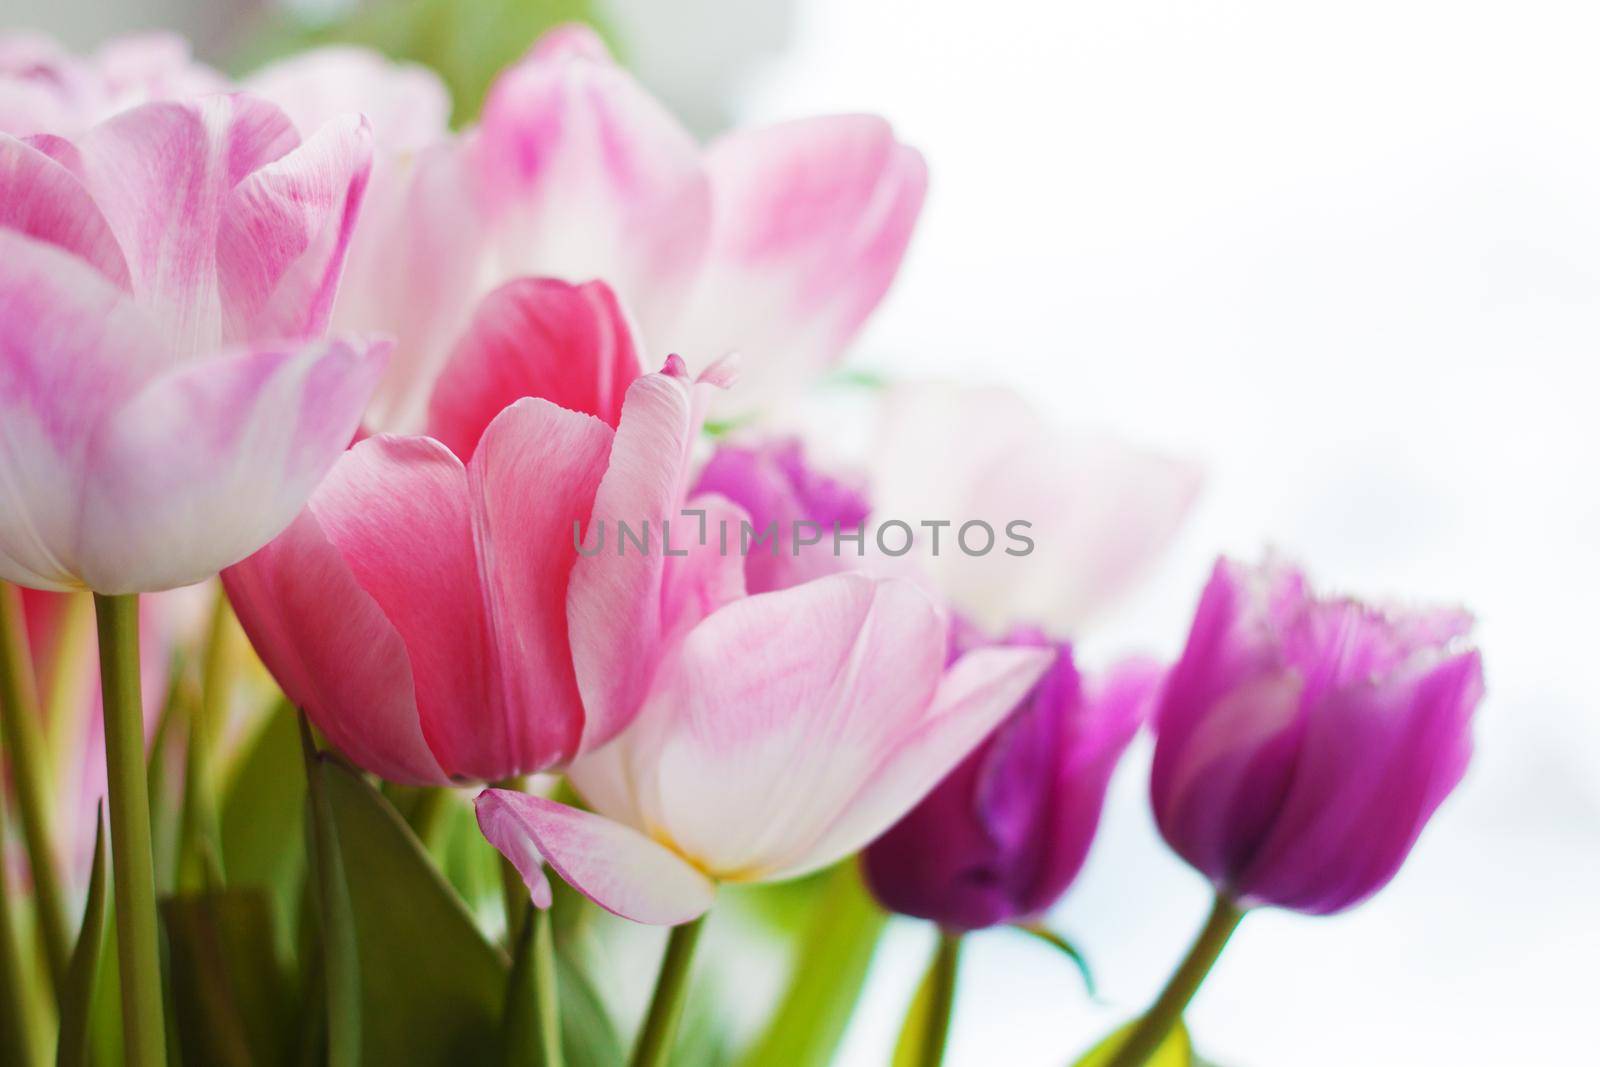 pink and purple tulips with green leaves close up on white background by dreamloud